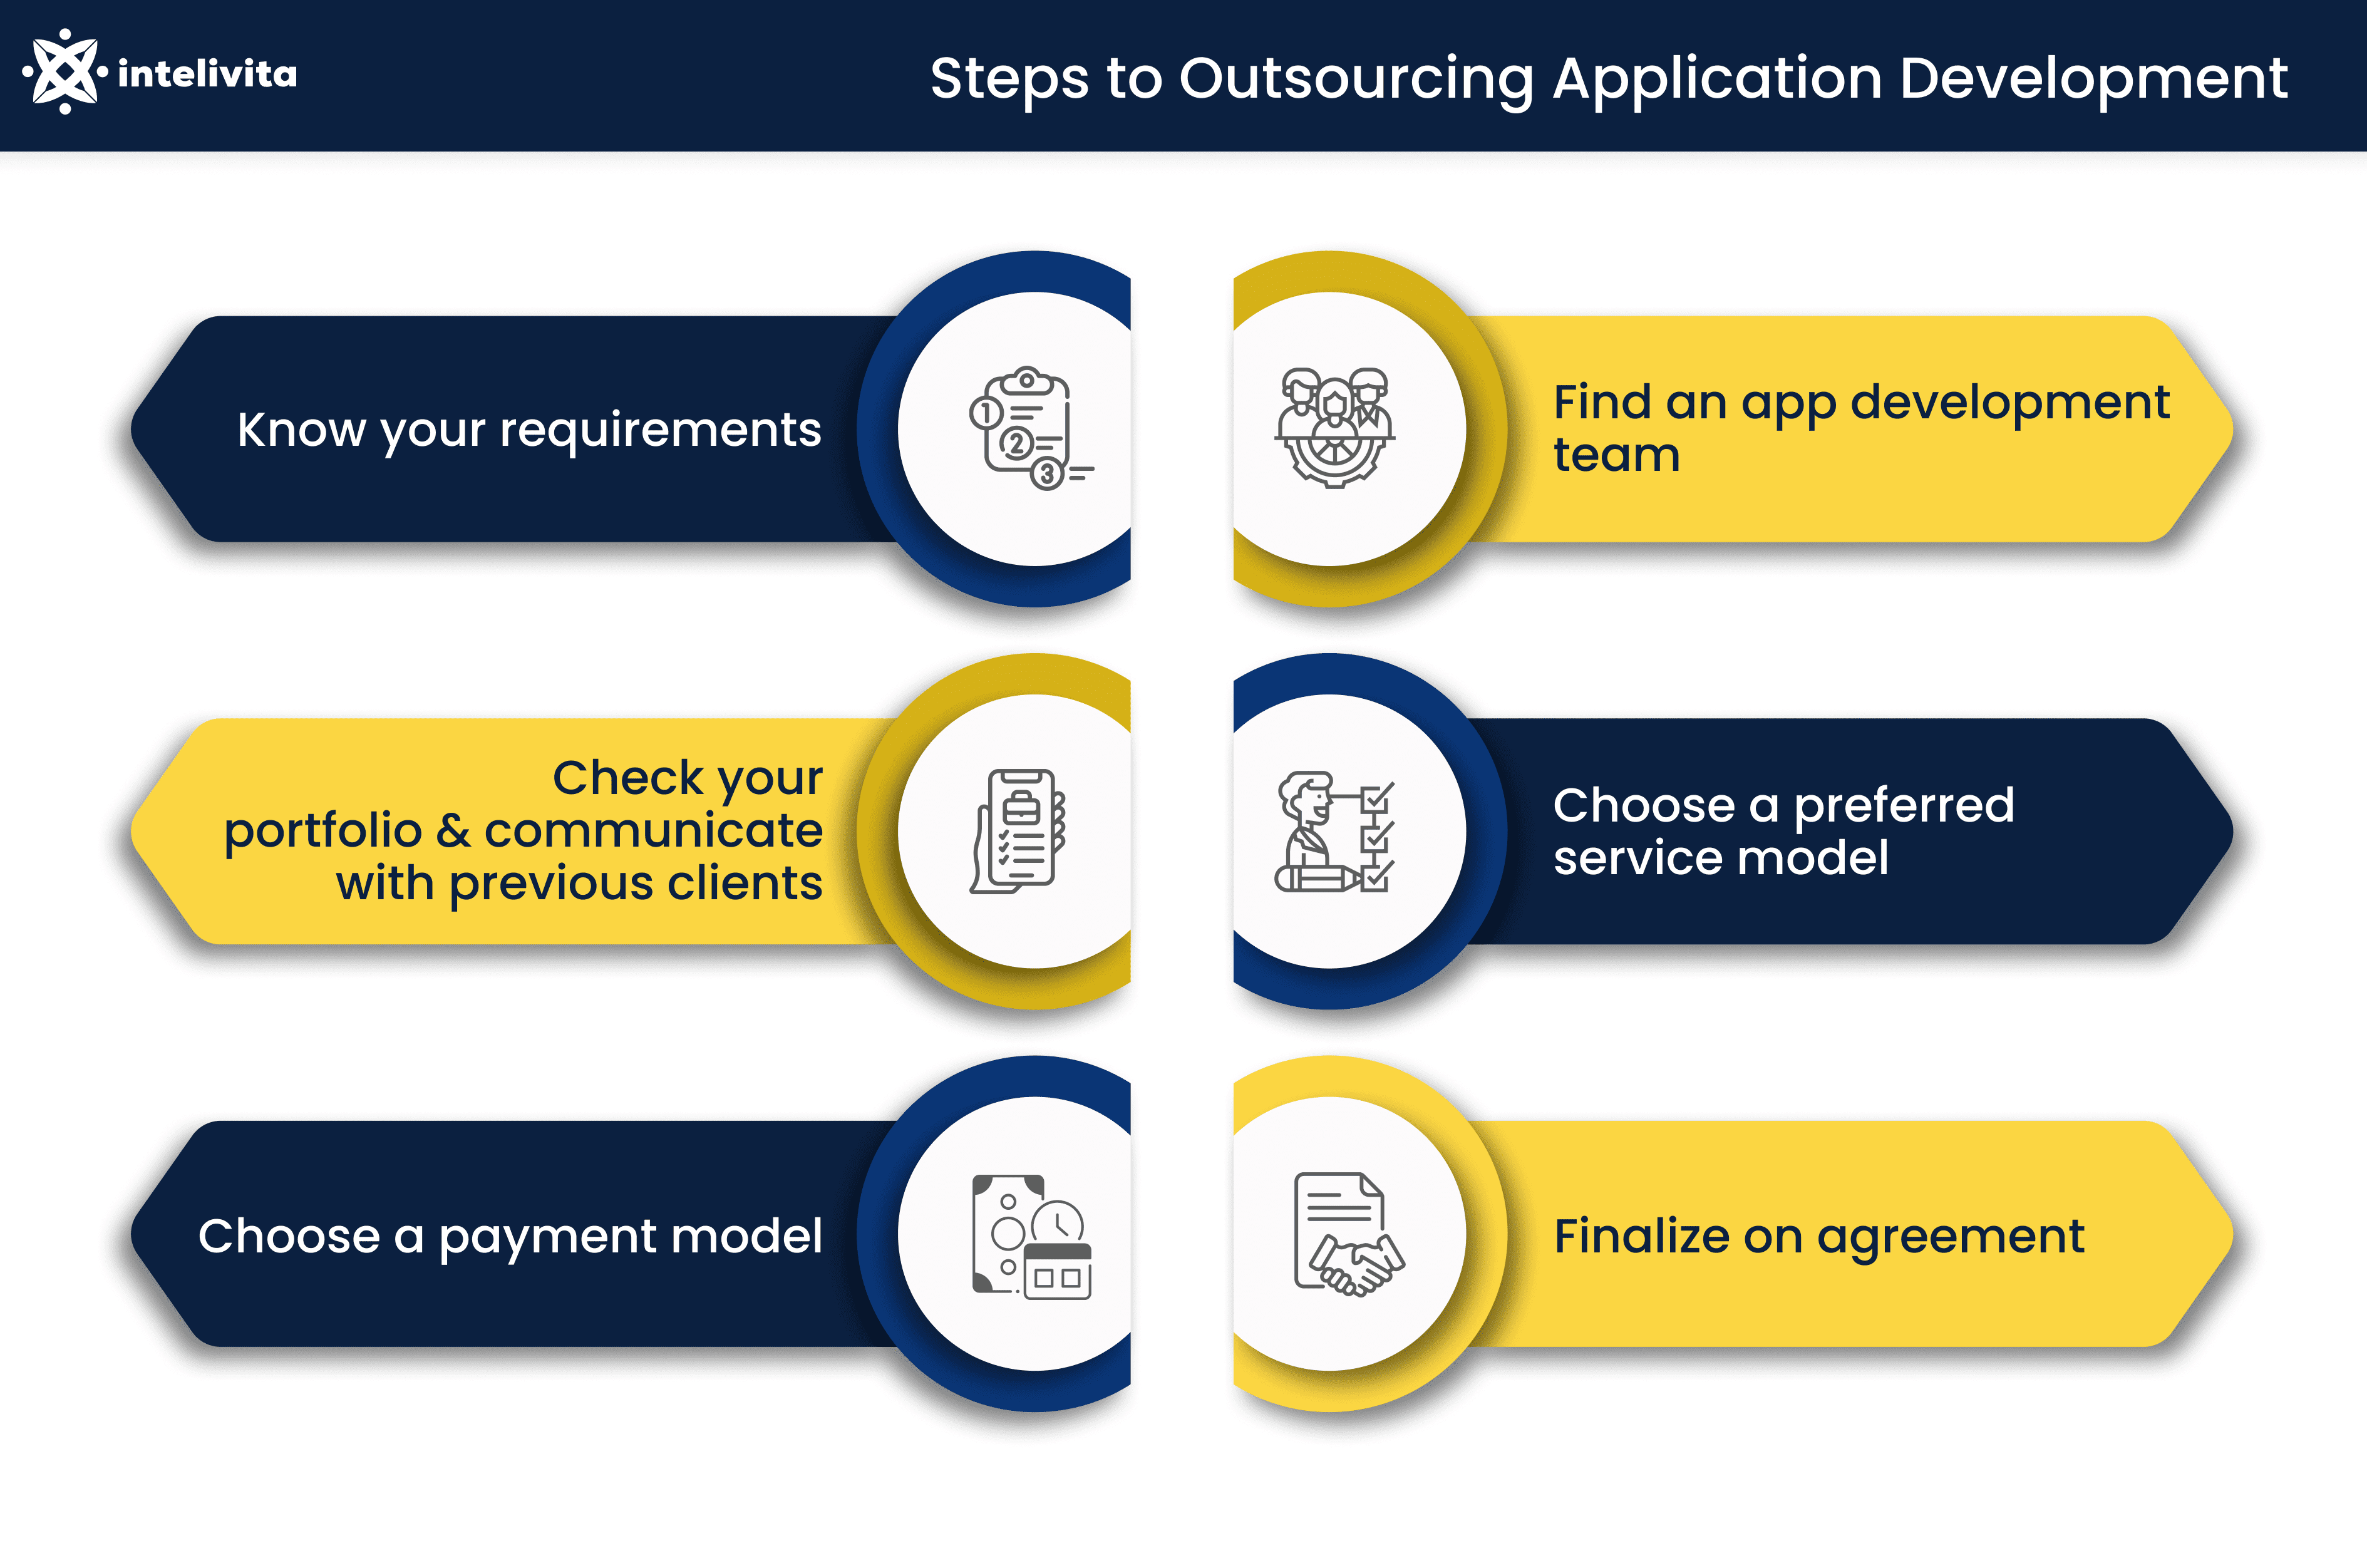 Image showing the 6 steps to Outsourcing App Development: 1-Know your requirements, 2-Find an App Development team, 3-Check your portfolio and communicate with previous clients, 4-Choose a preferred service model, 5-Choose a payment model and, 6-Finalize on agreement.